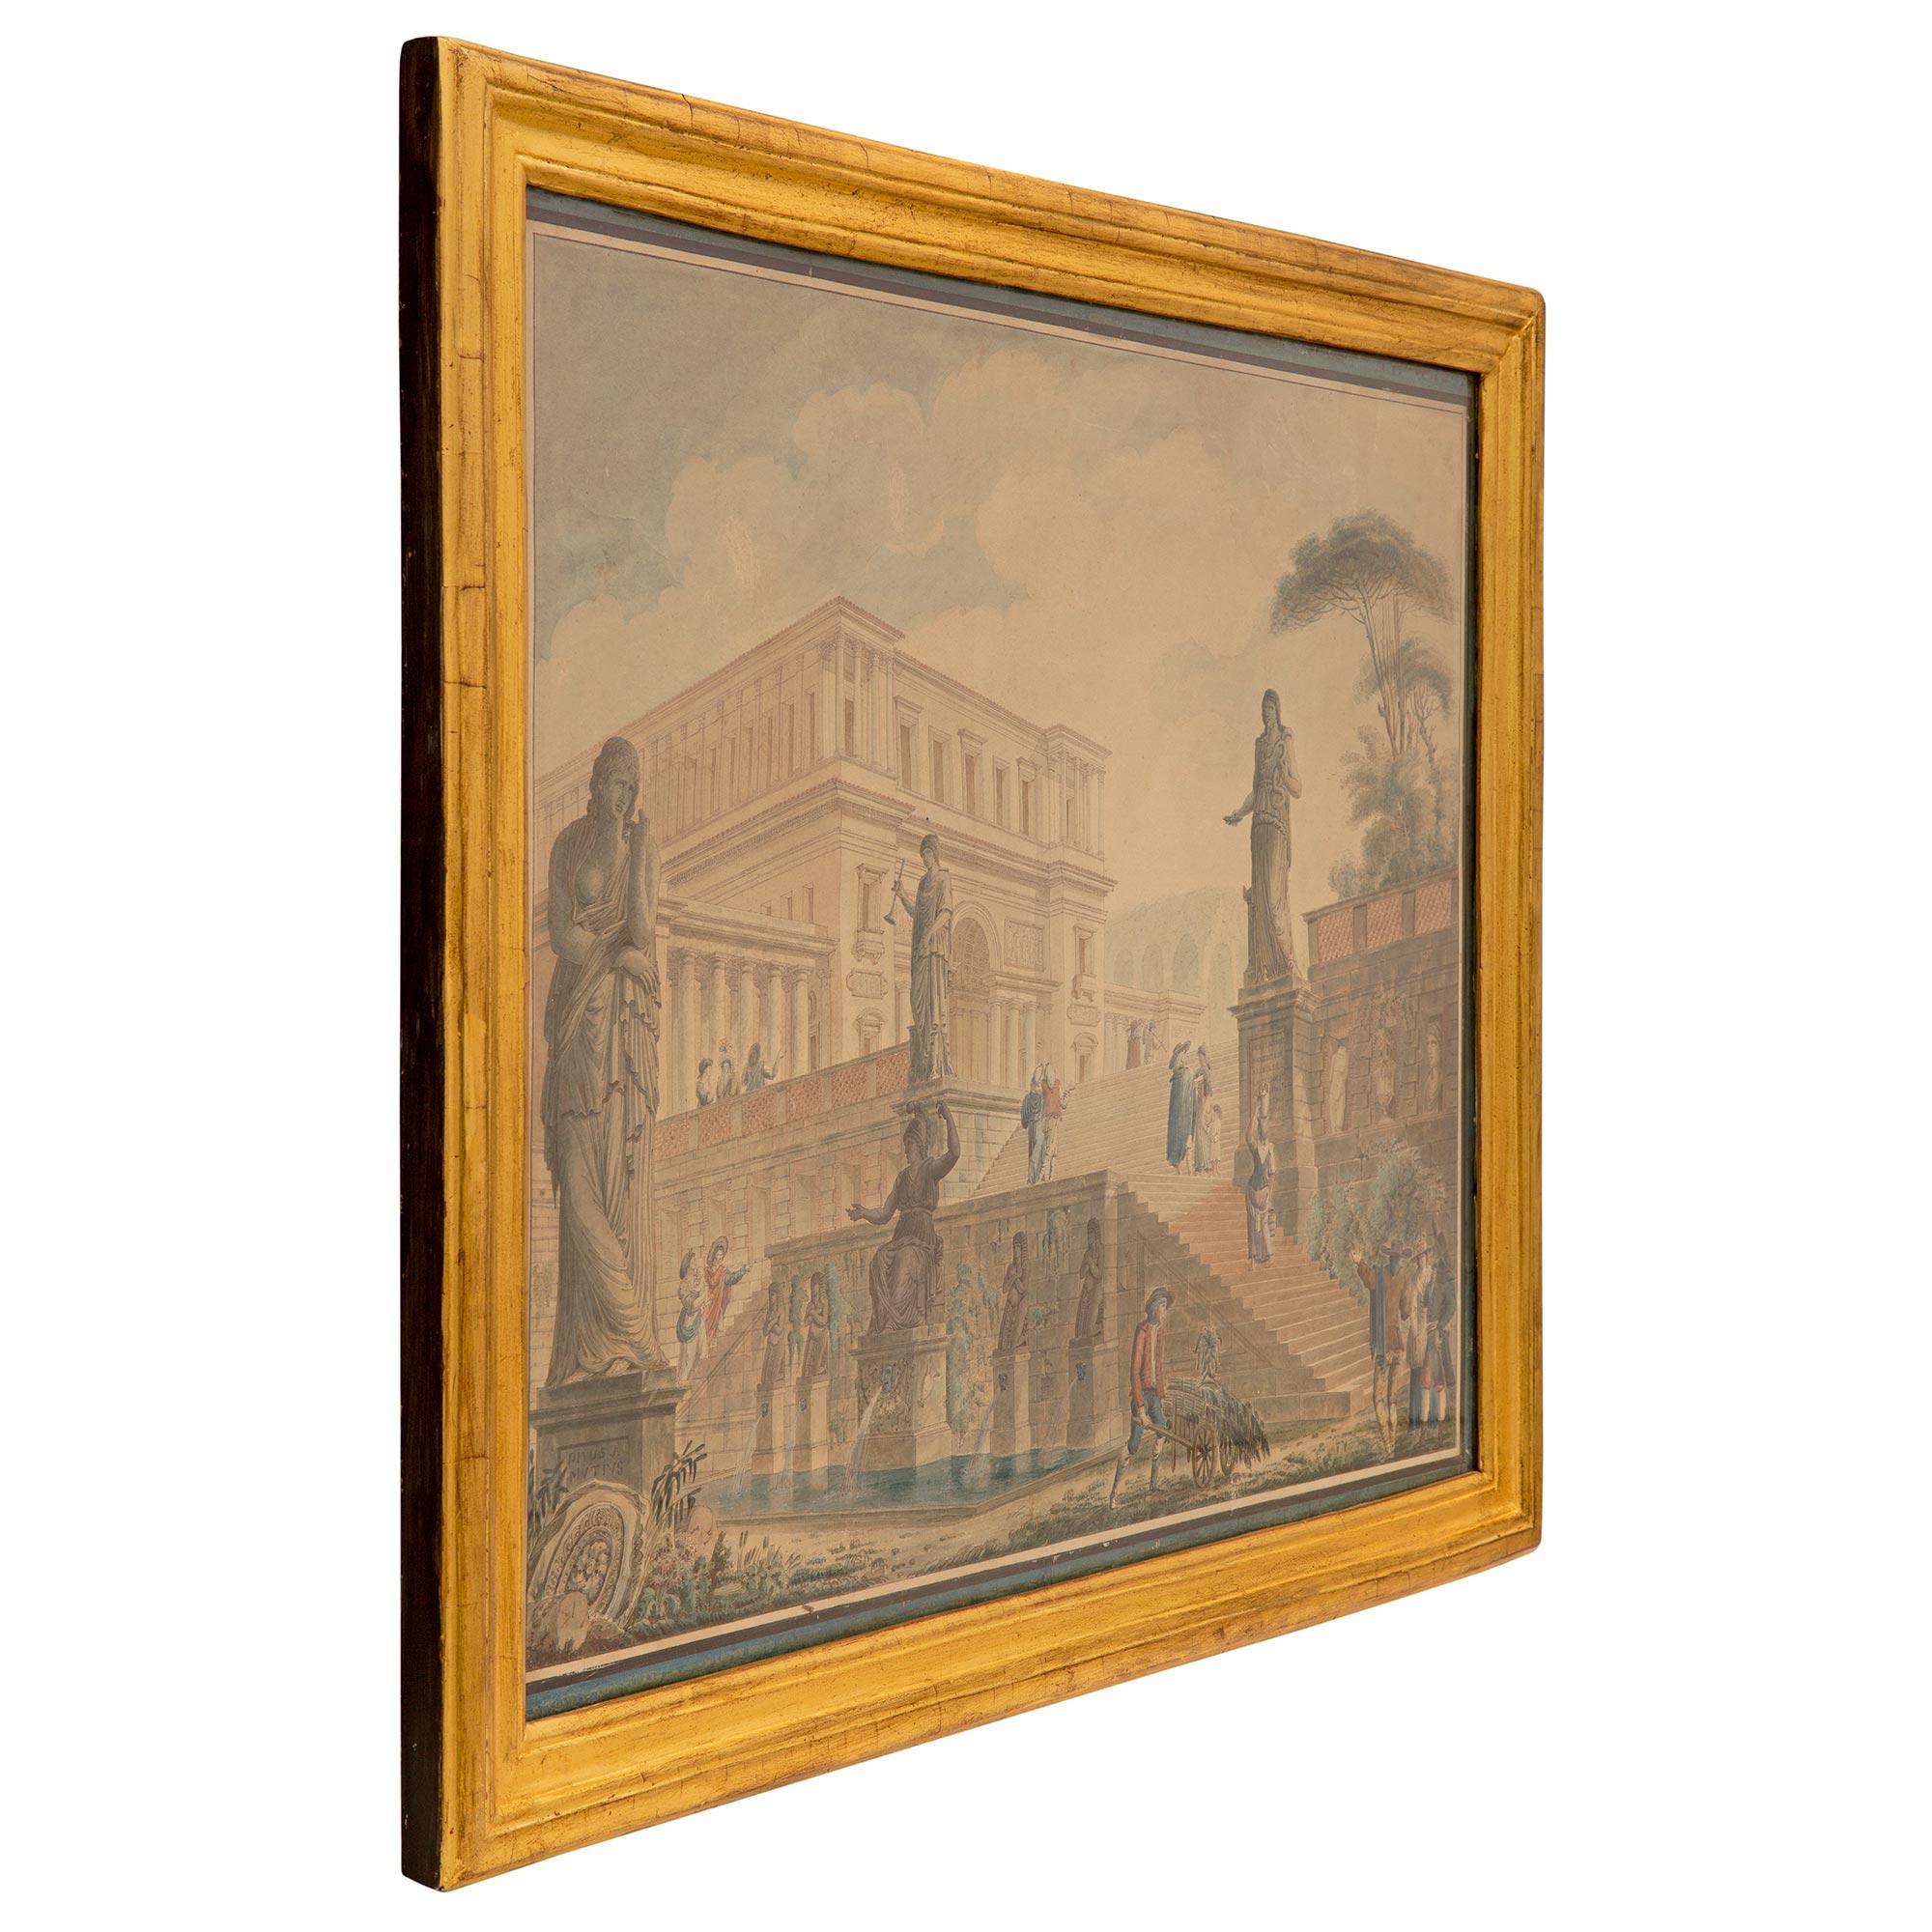 A beautiful Italian 18th century Louis XVI period Gouache in its original giltwood frame. The wonderfully executed painting depicts a stunning Italian structure with grand stairs leading up to a most impressive triumphal arch. At each side of the